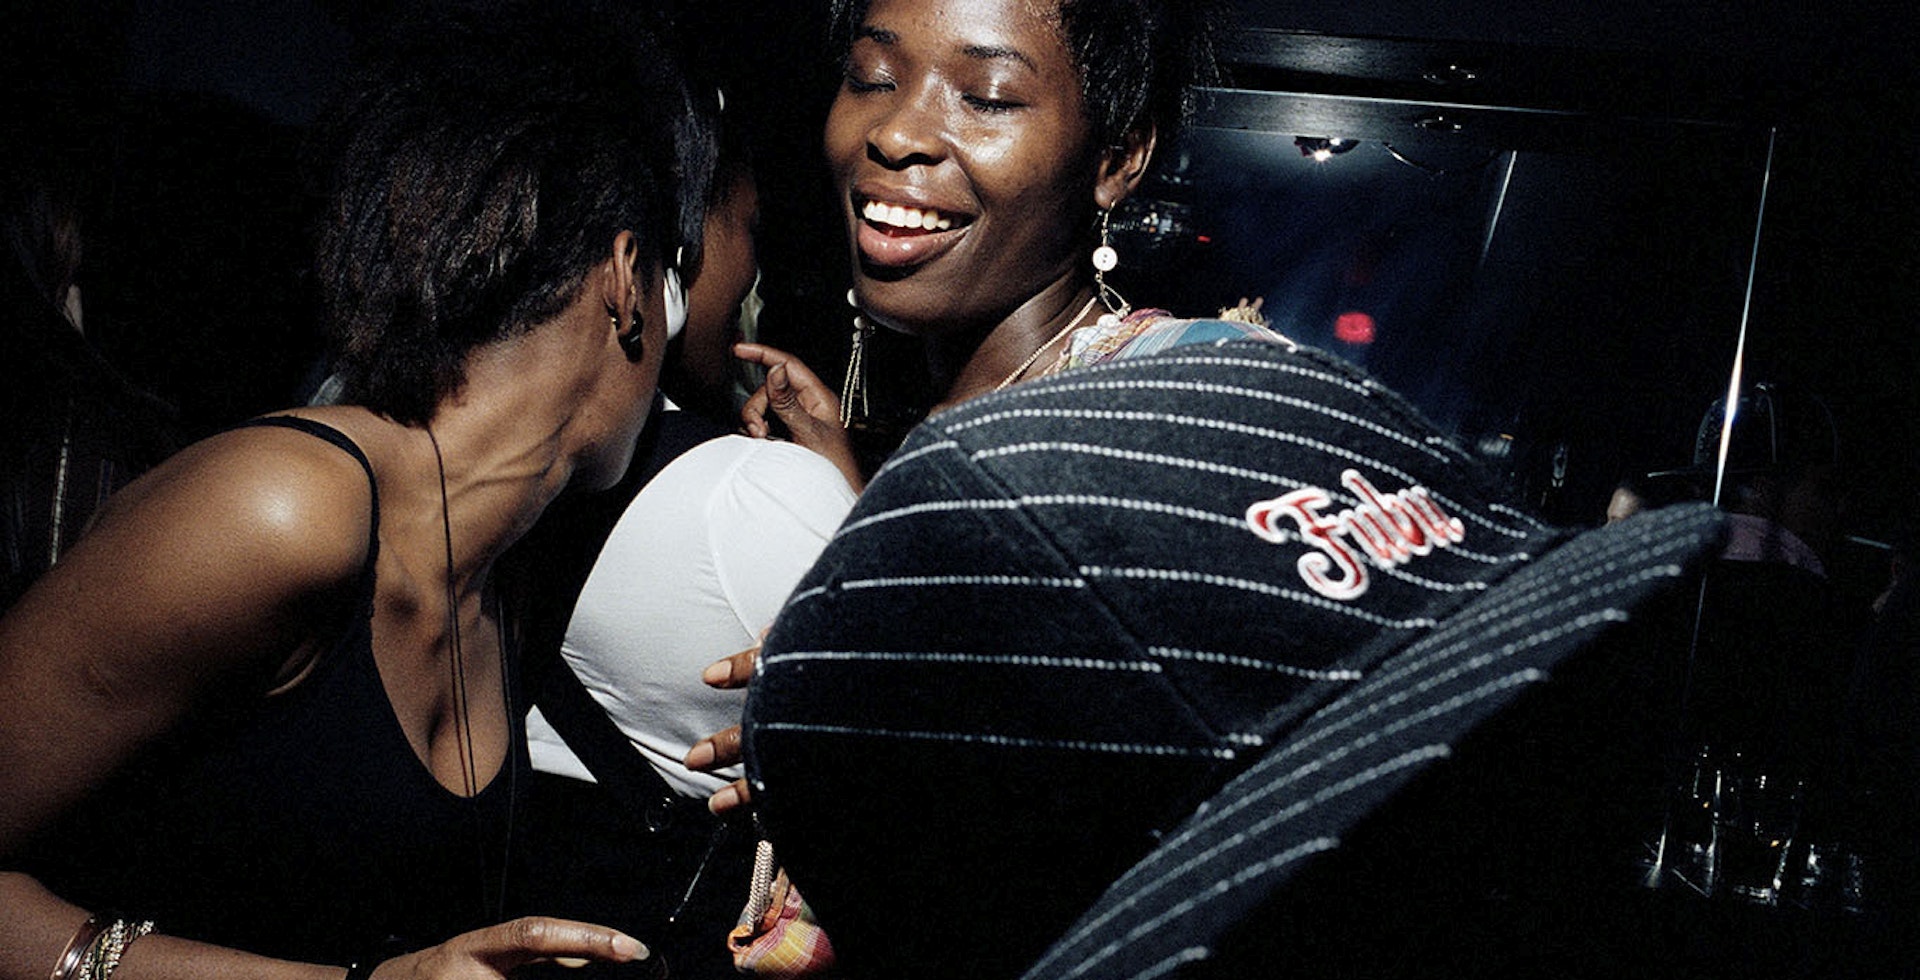 Hedonistic photos of club nights around the world in the 90s and 00s